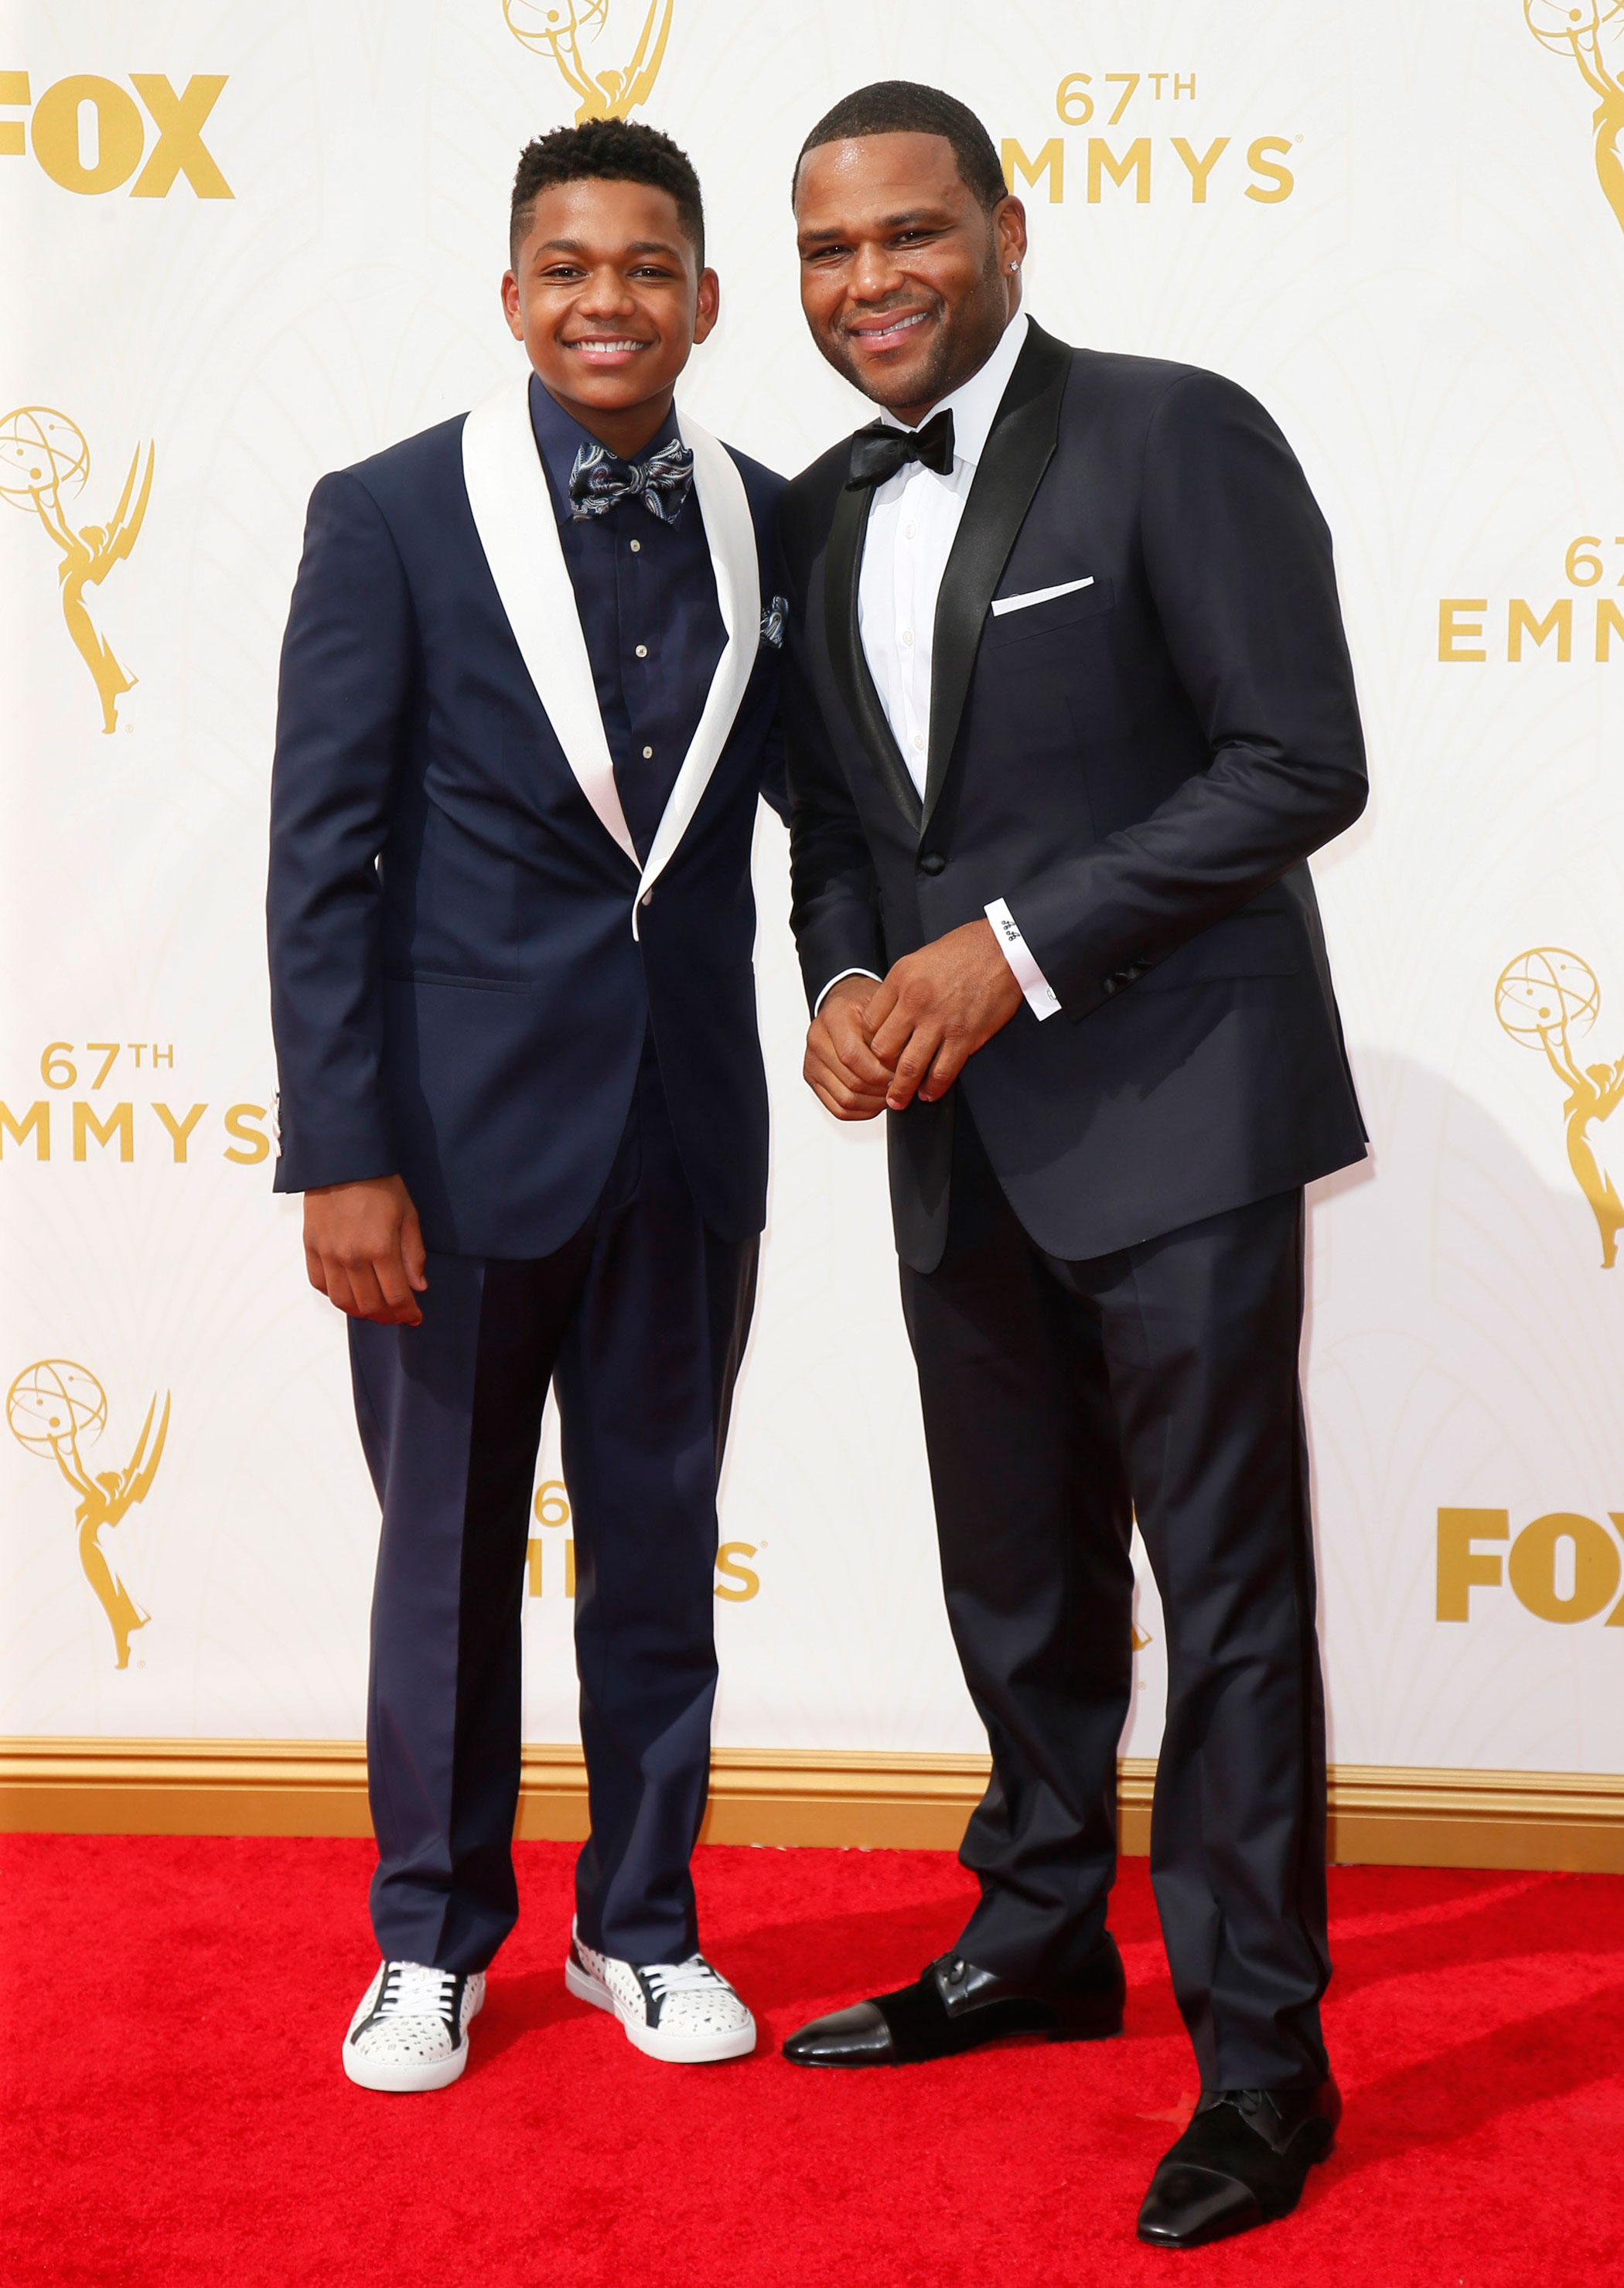 67th Emmys Awards - Nathan Anderson and Anthony Anderson - 2015